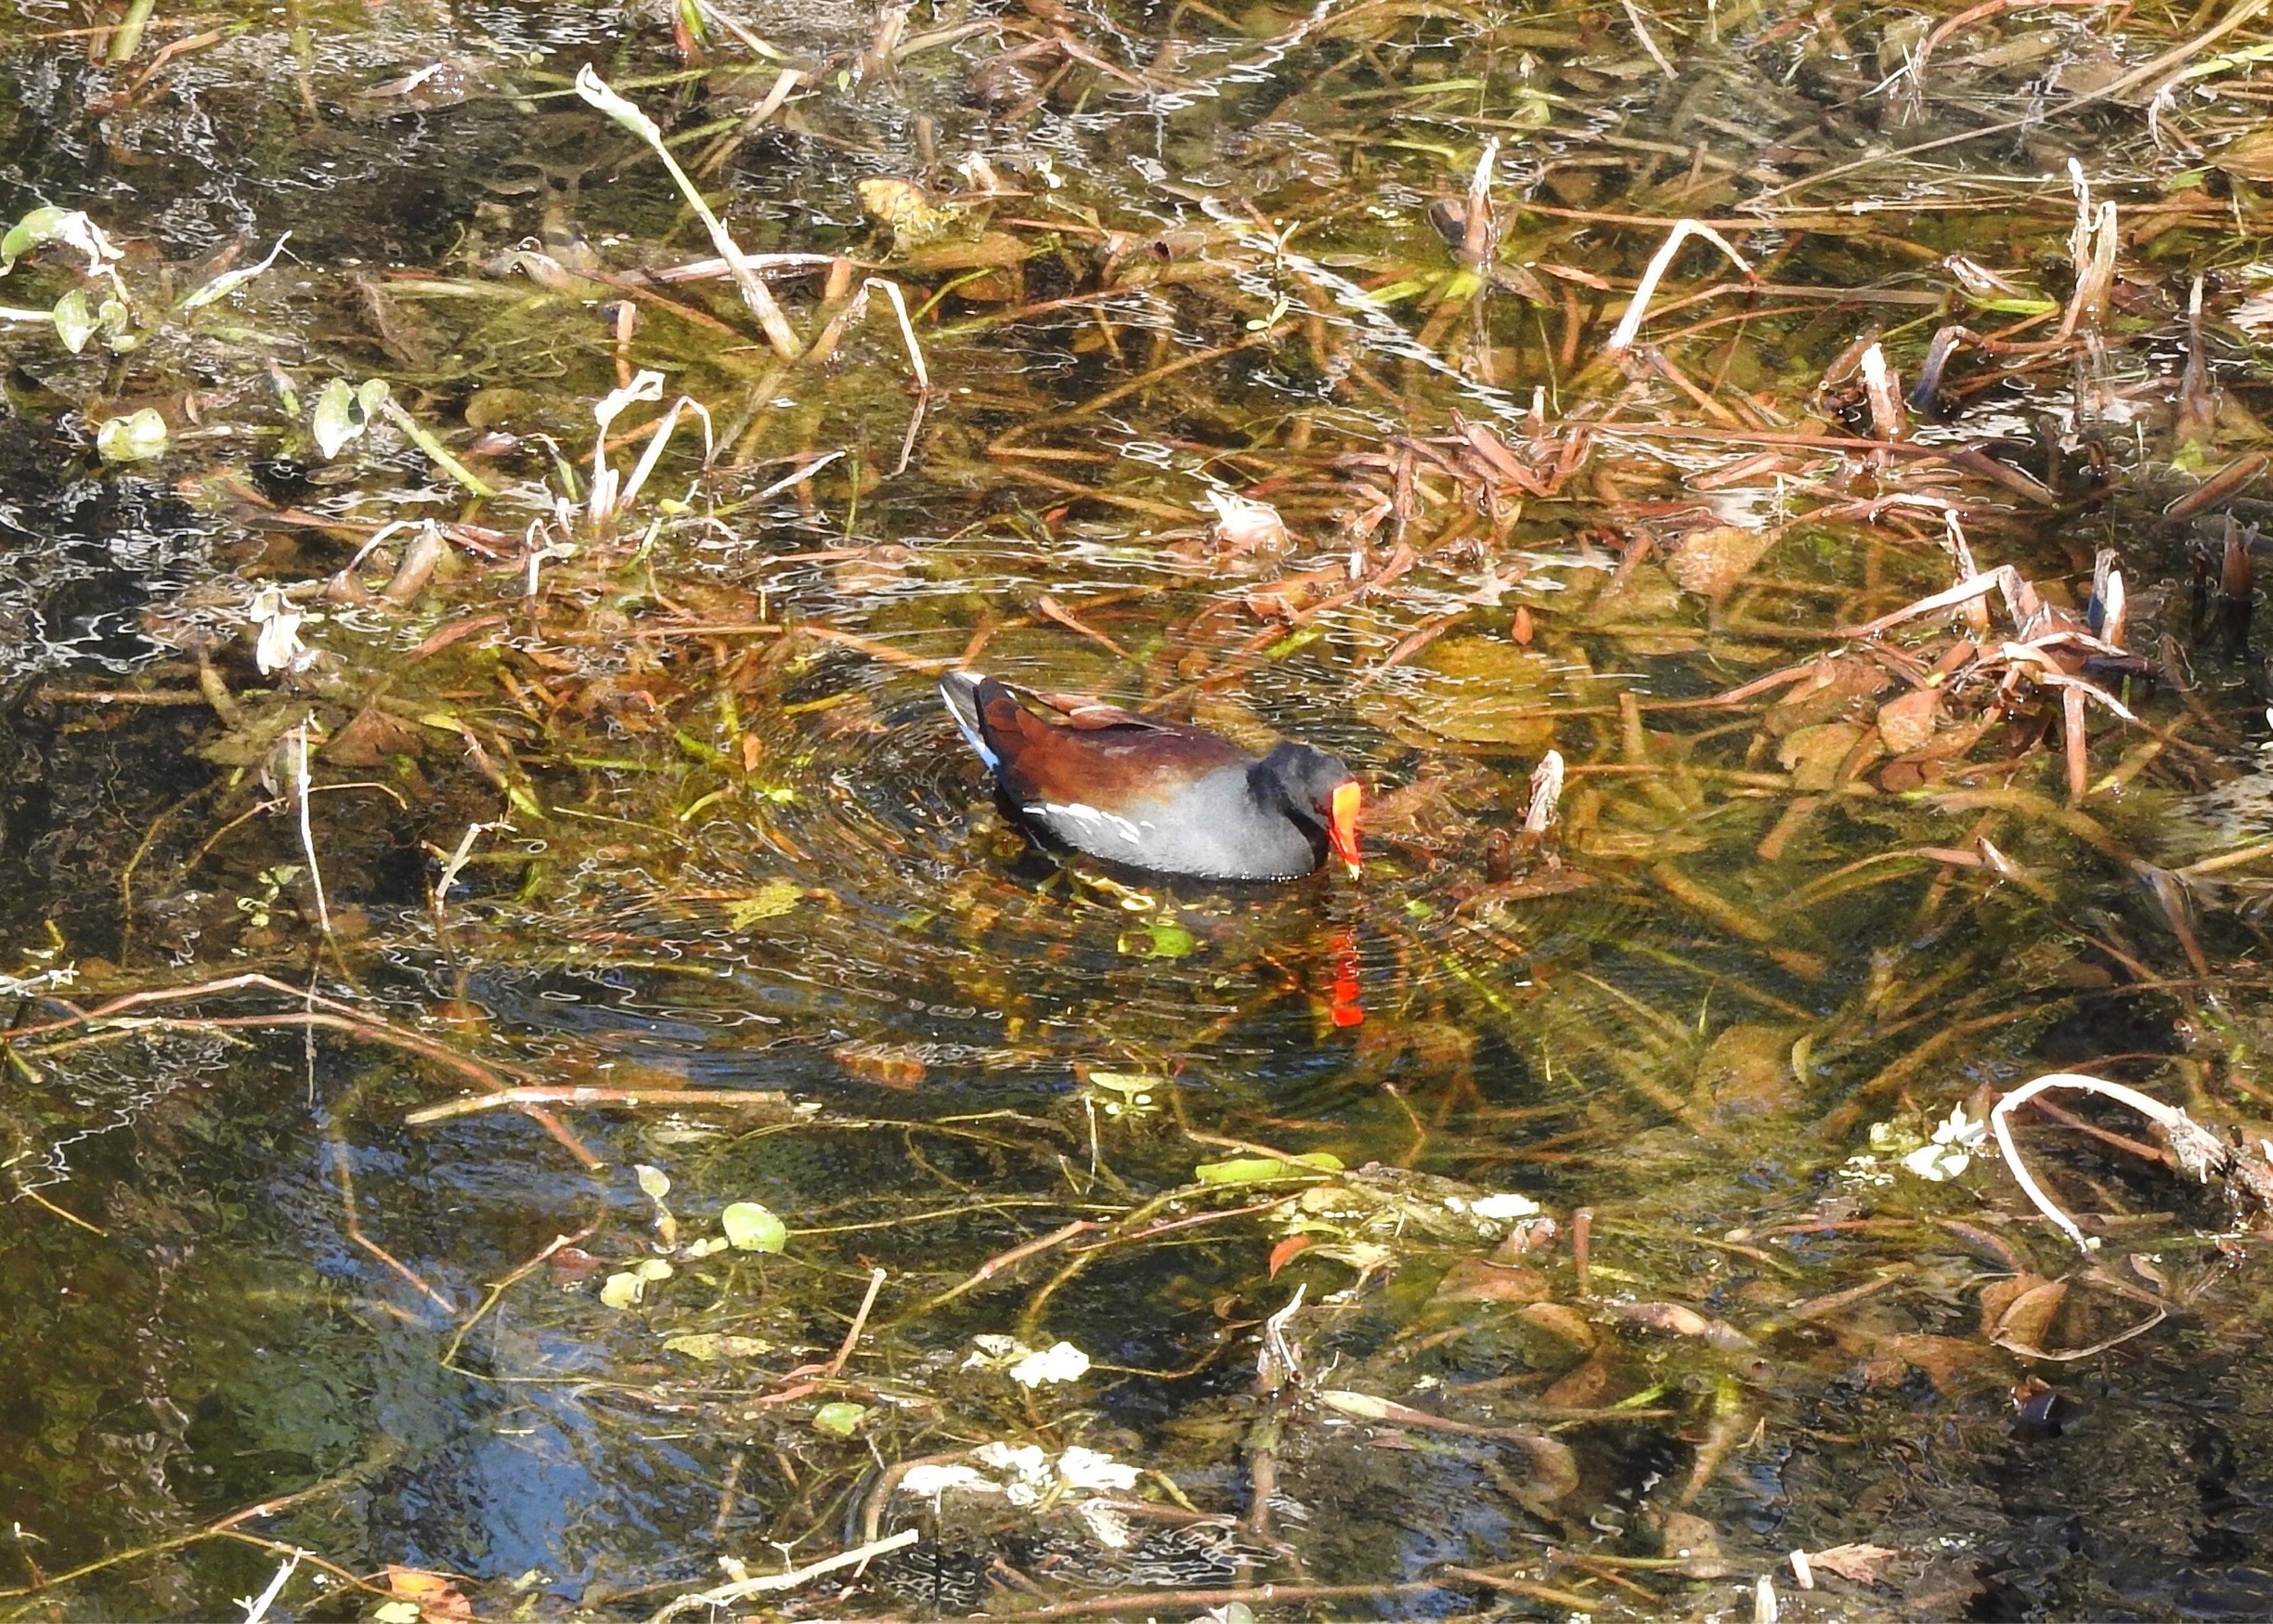 The Common Moorhen lives around well-vegetated marshes, ponds, canals, etc.

#Nature